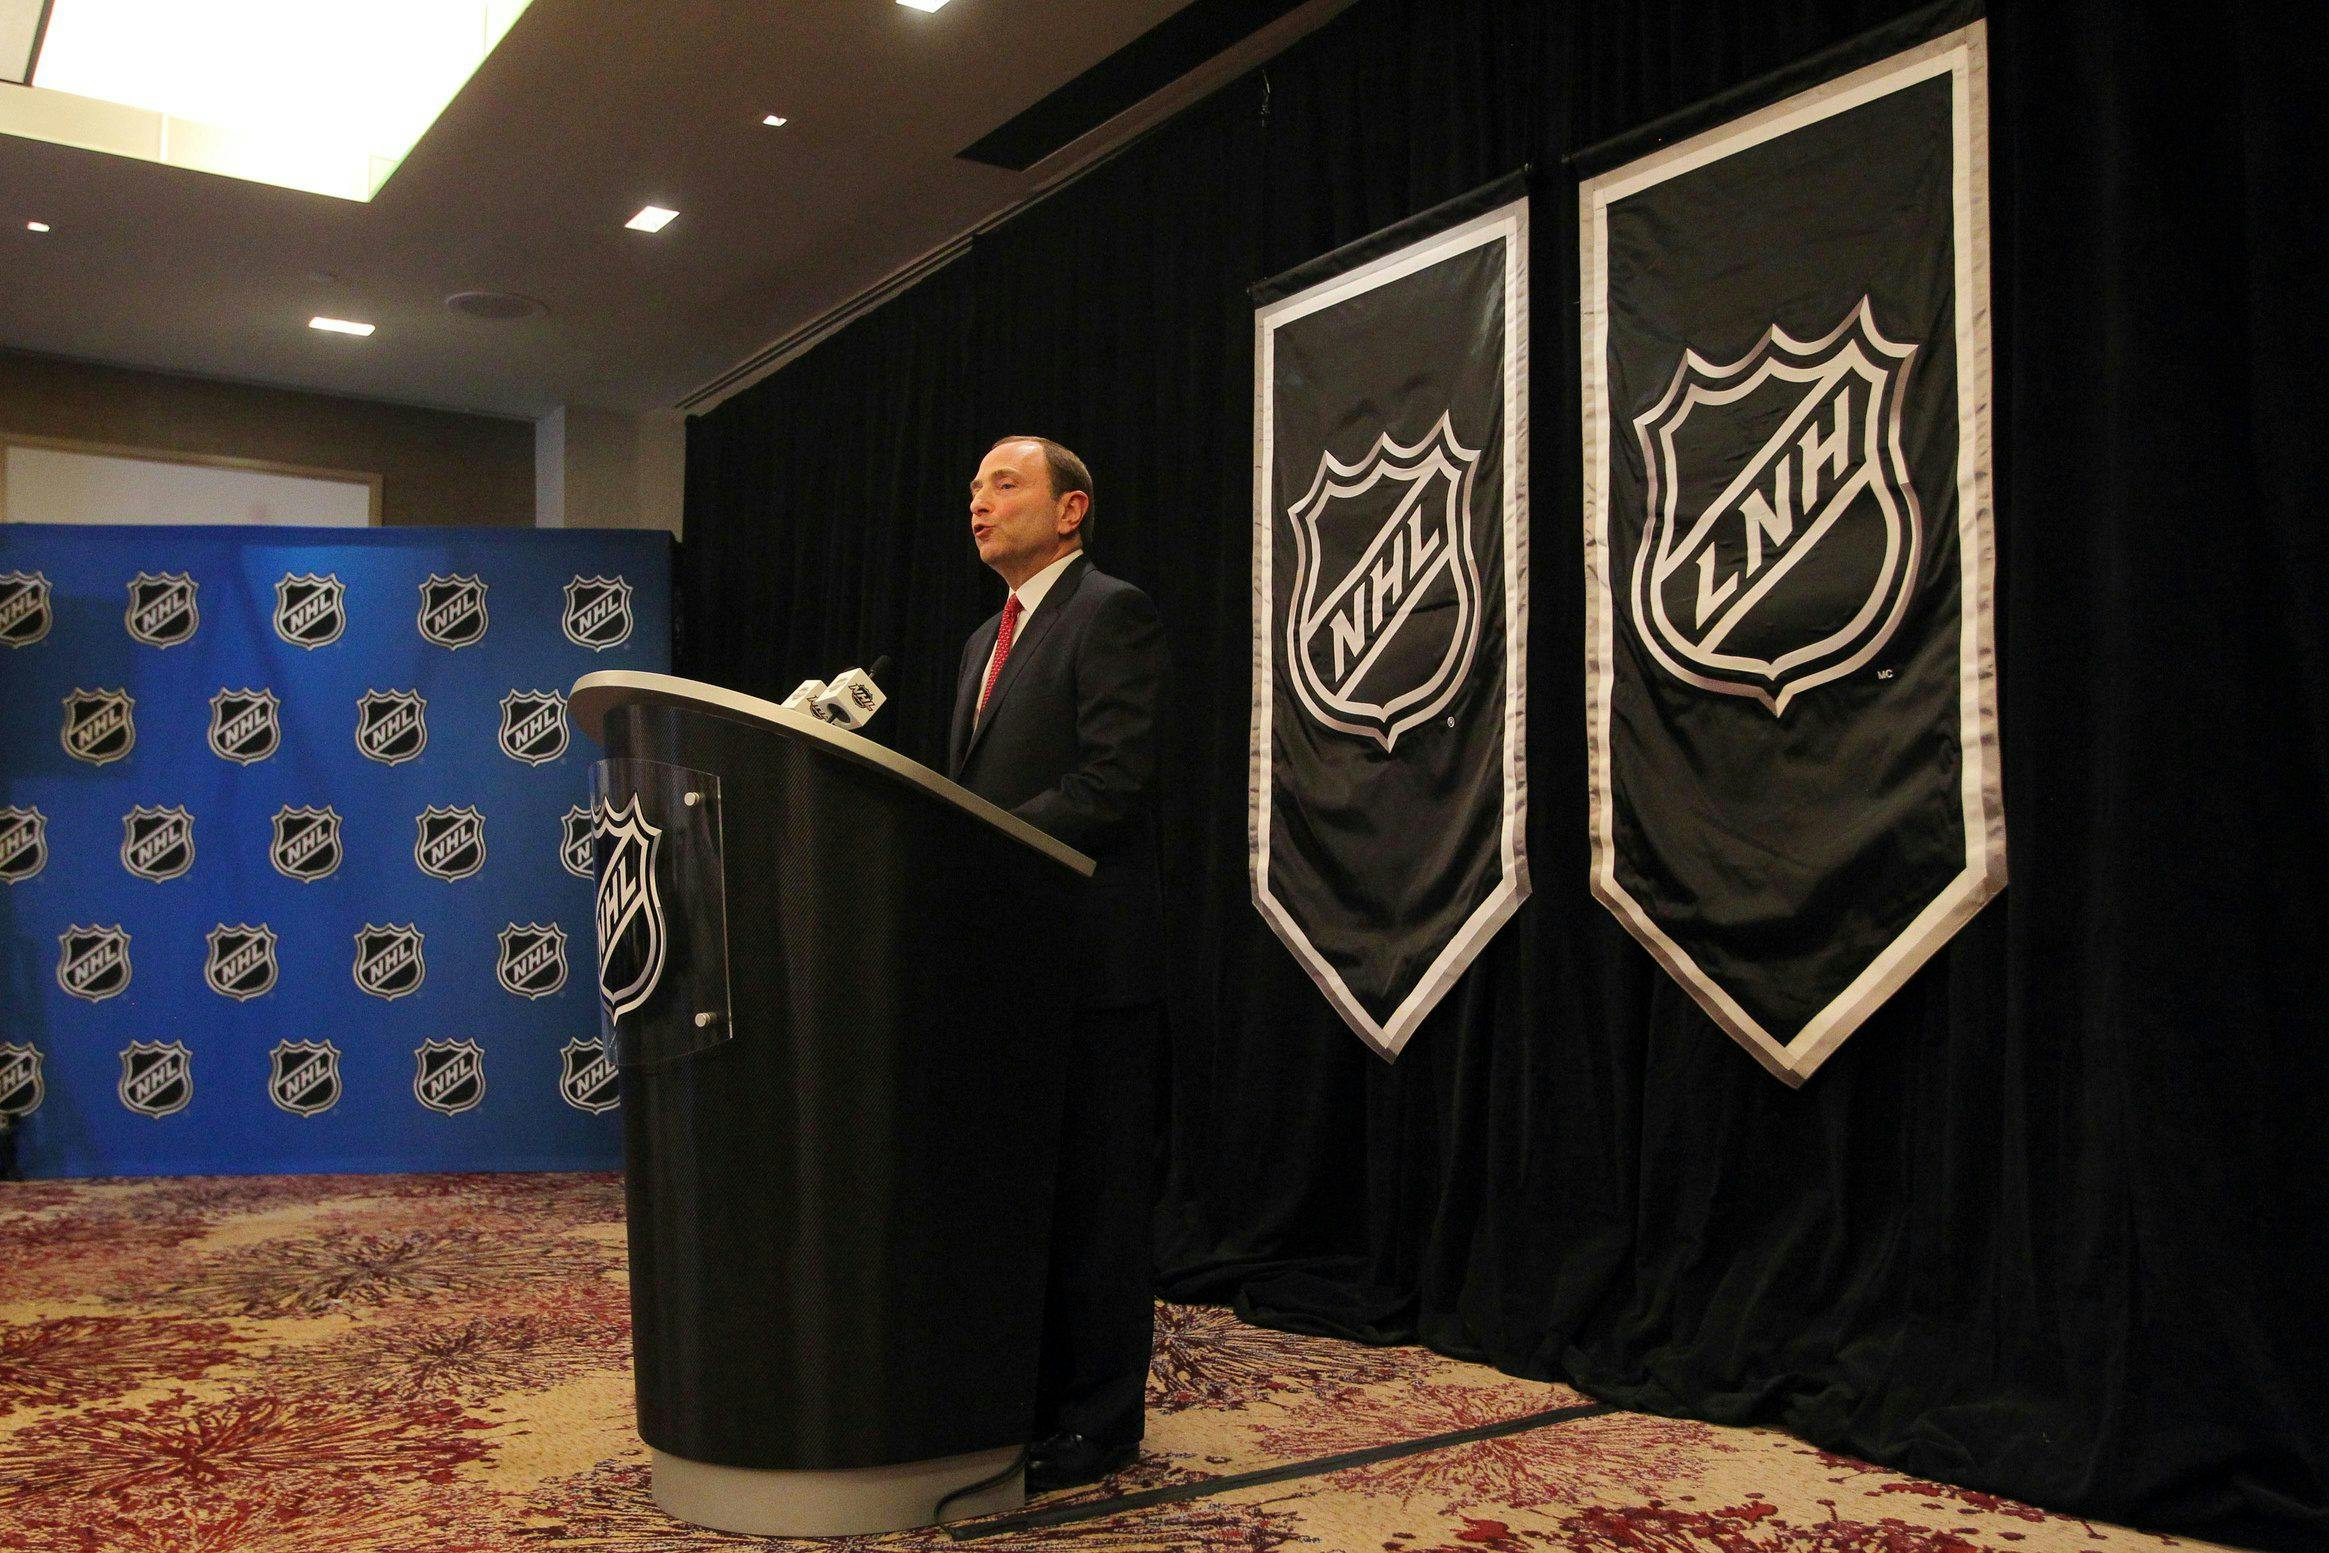 Not much progress on NHL rule changes for 2023-24